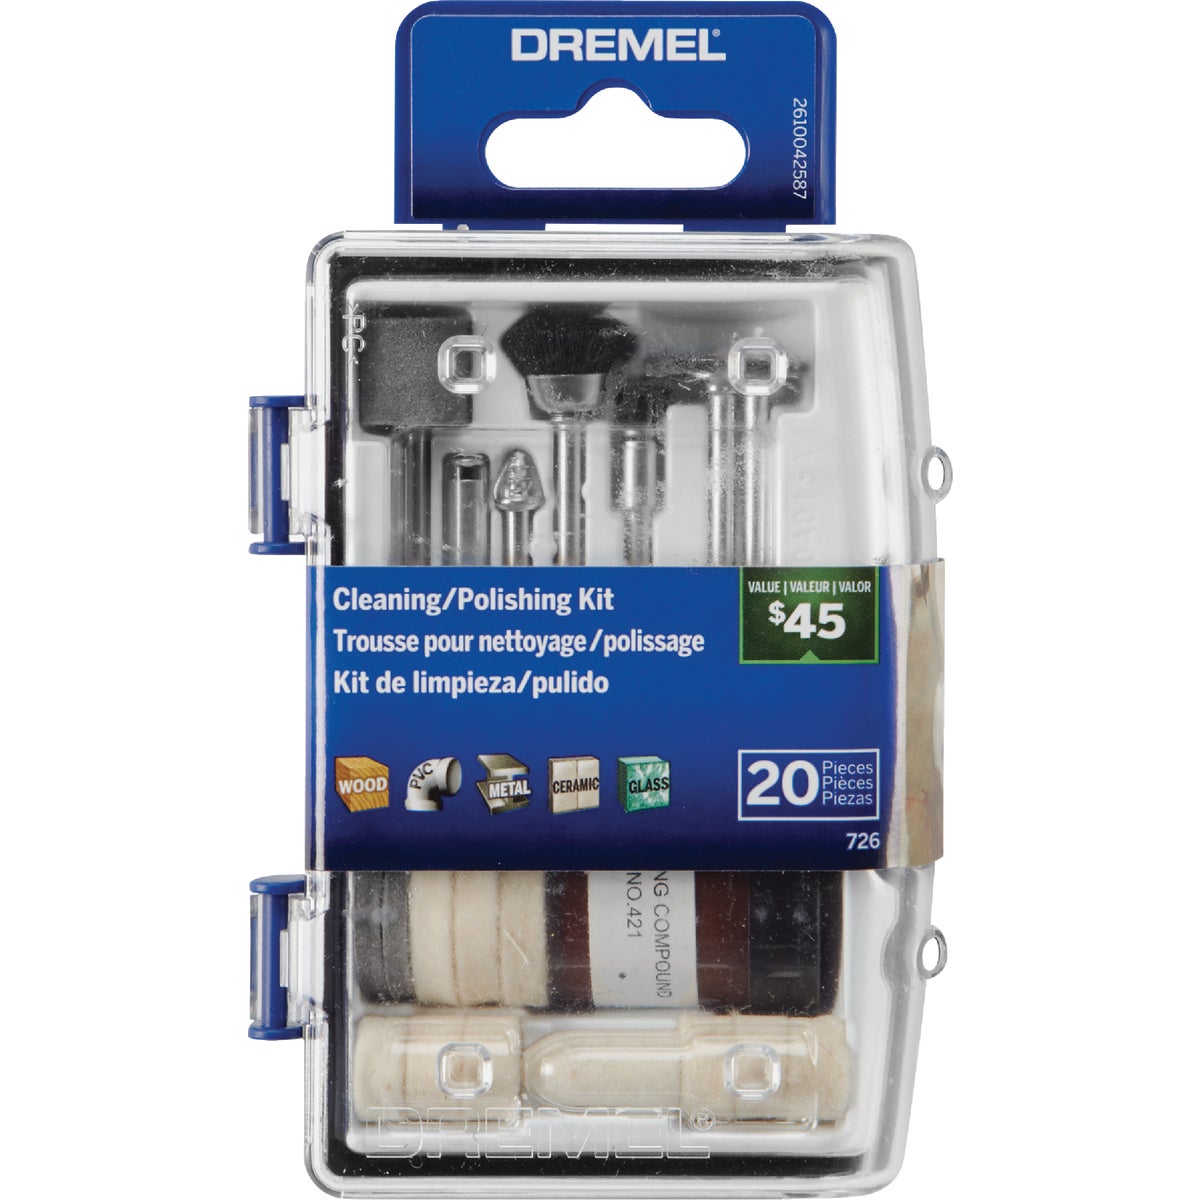 Item 328286, Dremel 20-piece accessory micro kit is specially curated to clean and 